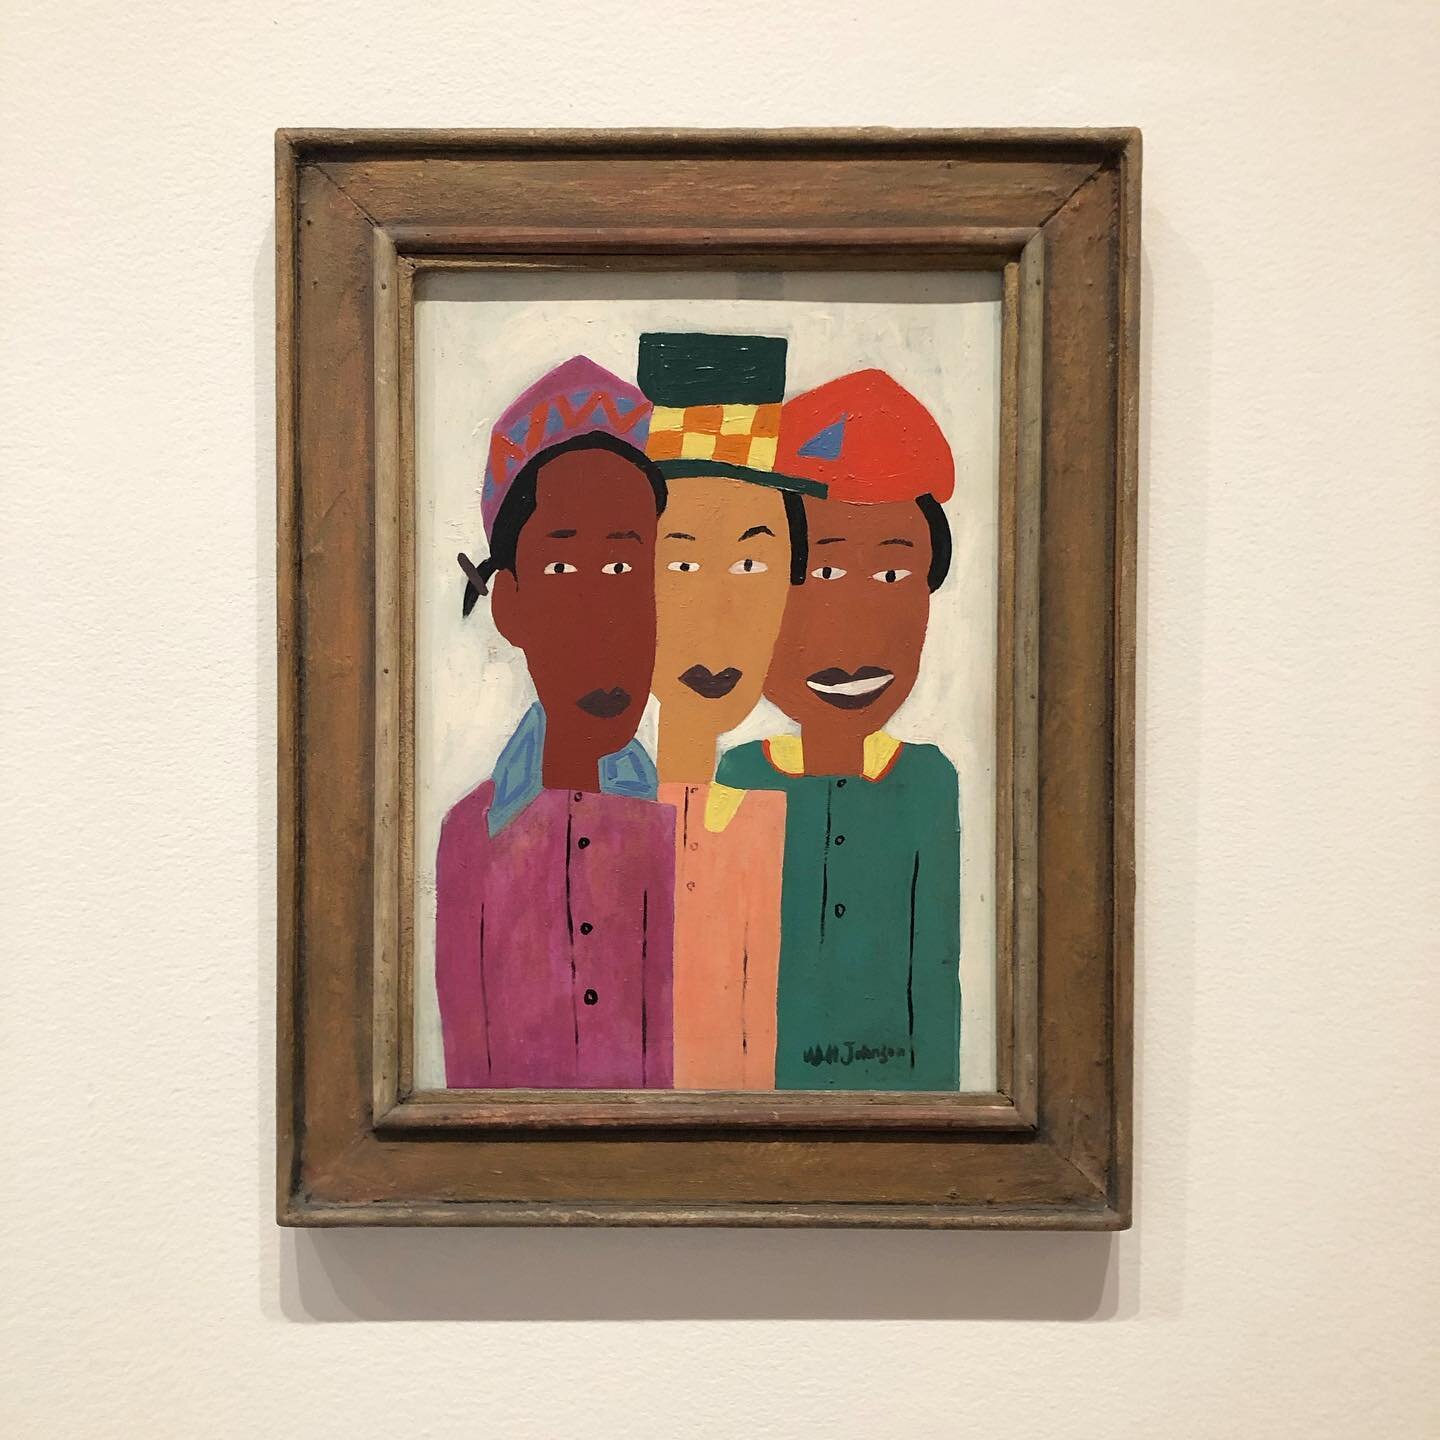 Children by William H. Johnson
Subtitle: I went to a museum and I had this entire gallery, and a few others, to myself! 

#artistherapy #museumofmodernart